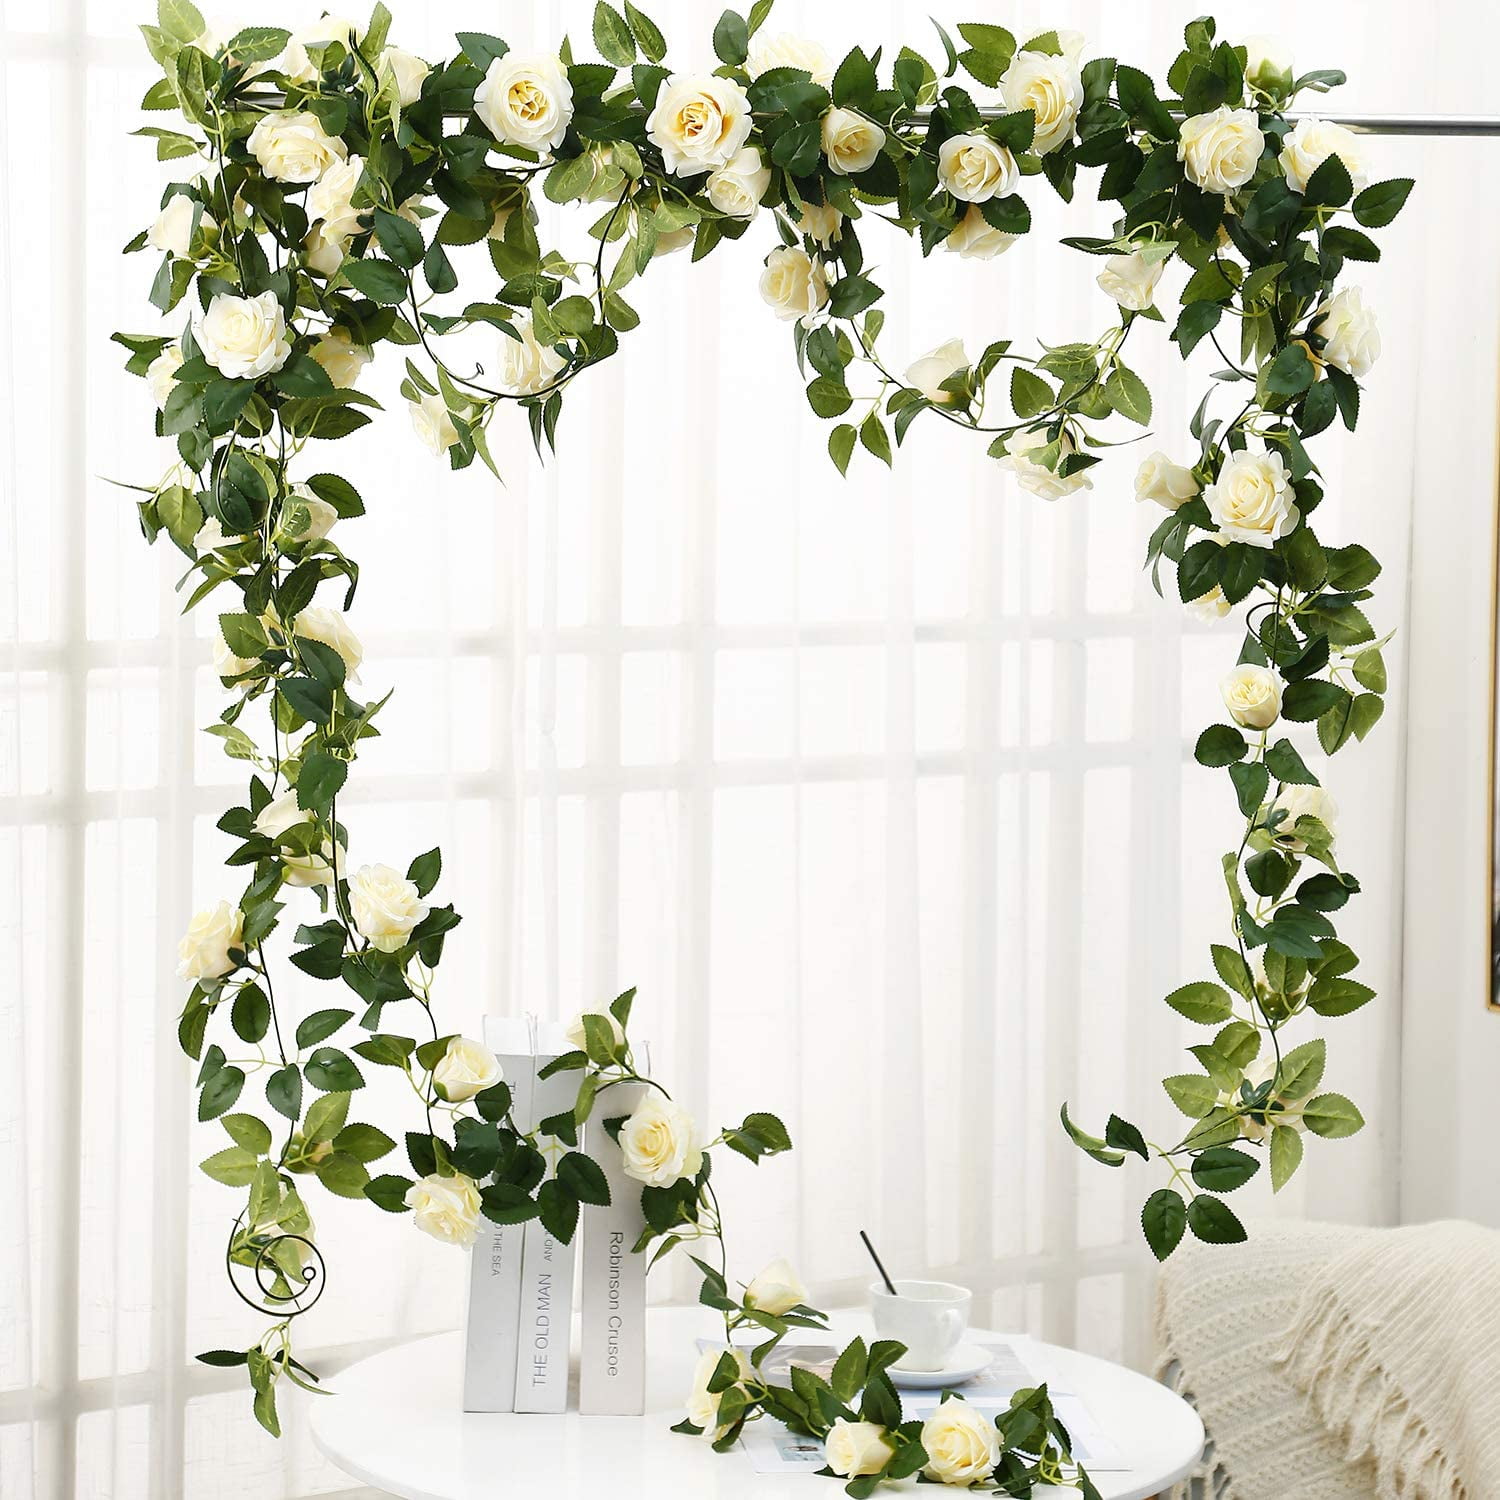 Garisey 6 pcs 48 FT Flower Garland Fake Rose Vine Artificial Flowers  Hanging Rose Ivy Garland for Home Hotel Party Wedding Arch Decor (Pink&Rose  Red)